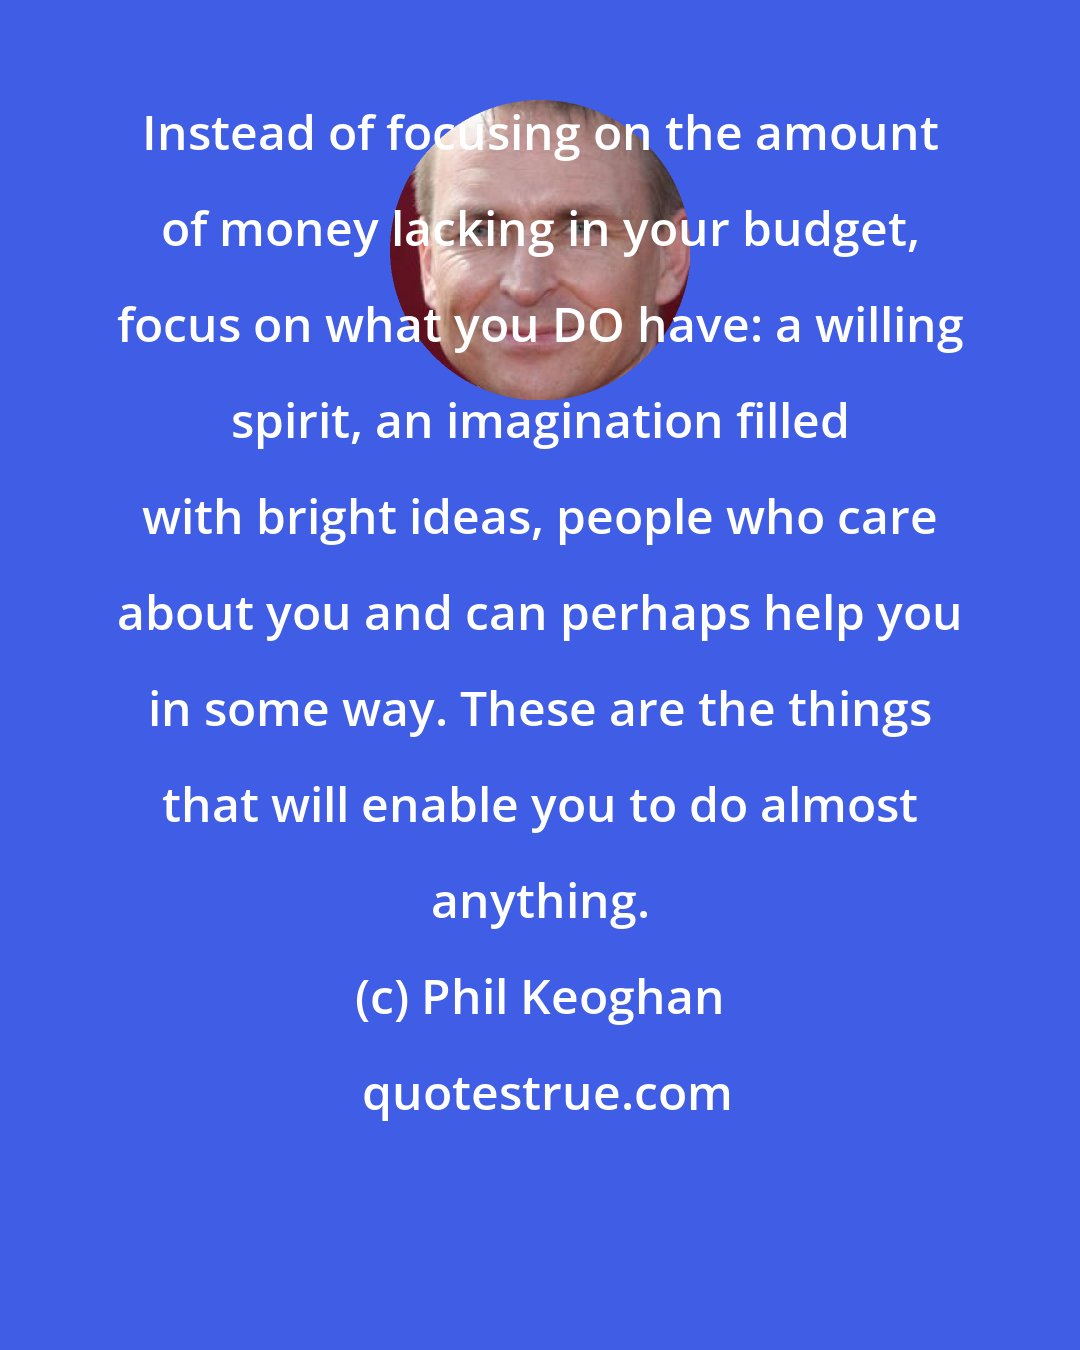 Phil Keoghan: Instead of focusing on the amount of money lacking in your budget, focus on what you DO have: a willing spirit, an imagination filled with bright ideas, people who care about you and can perhaps help you in some way. These are the things that will enable you to do almost anything.